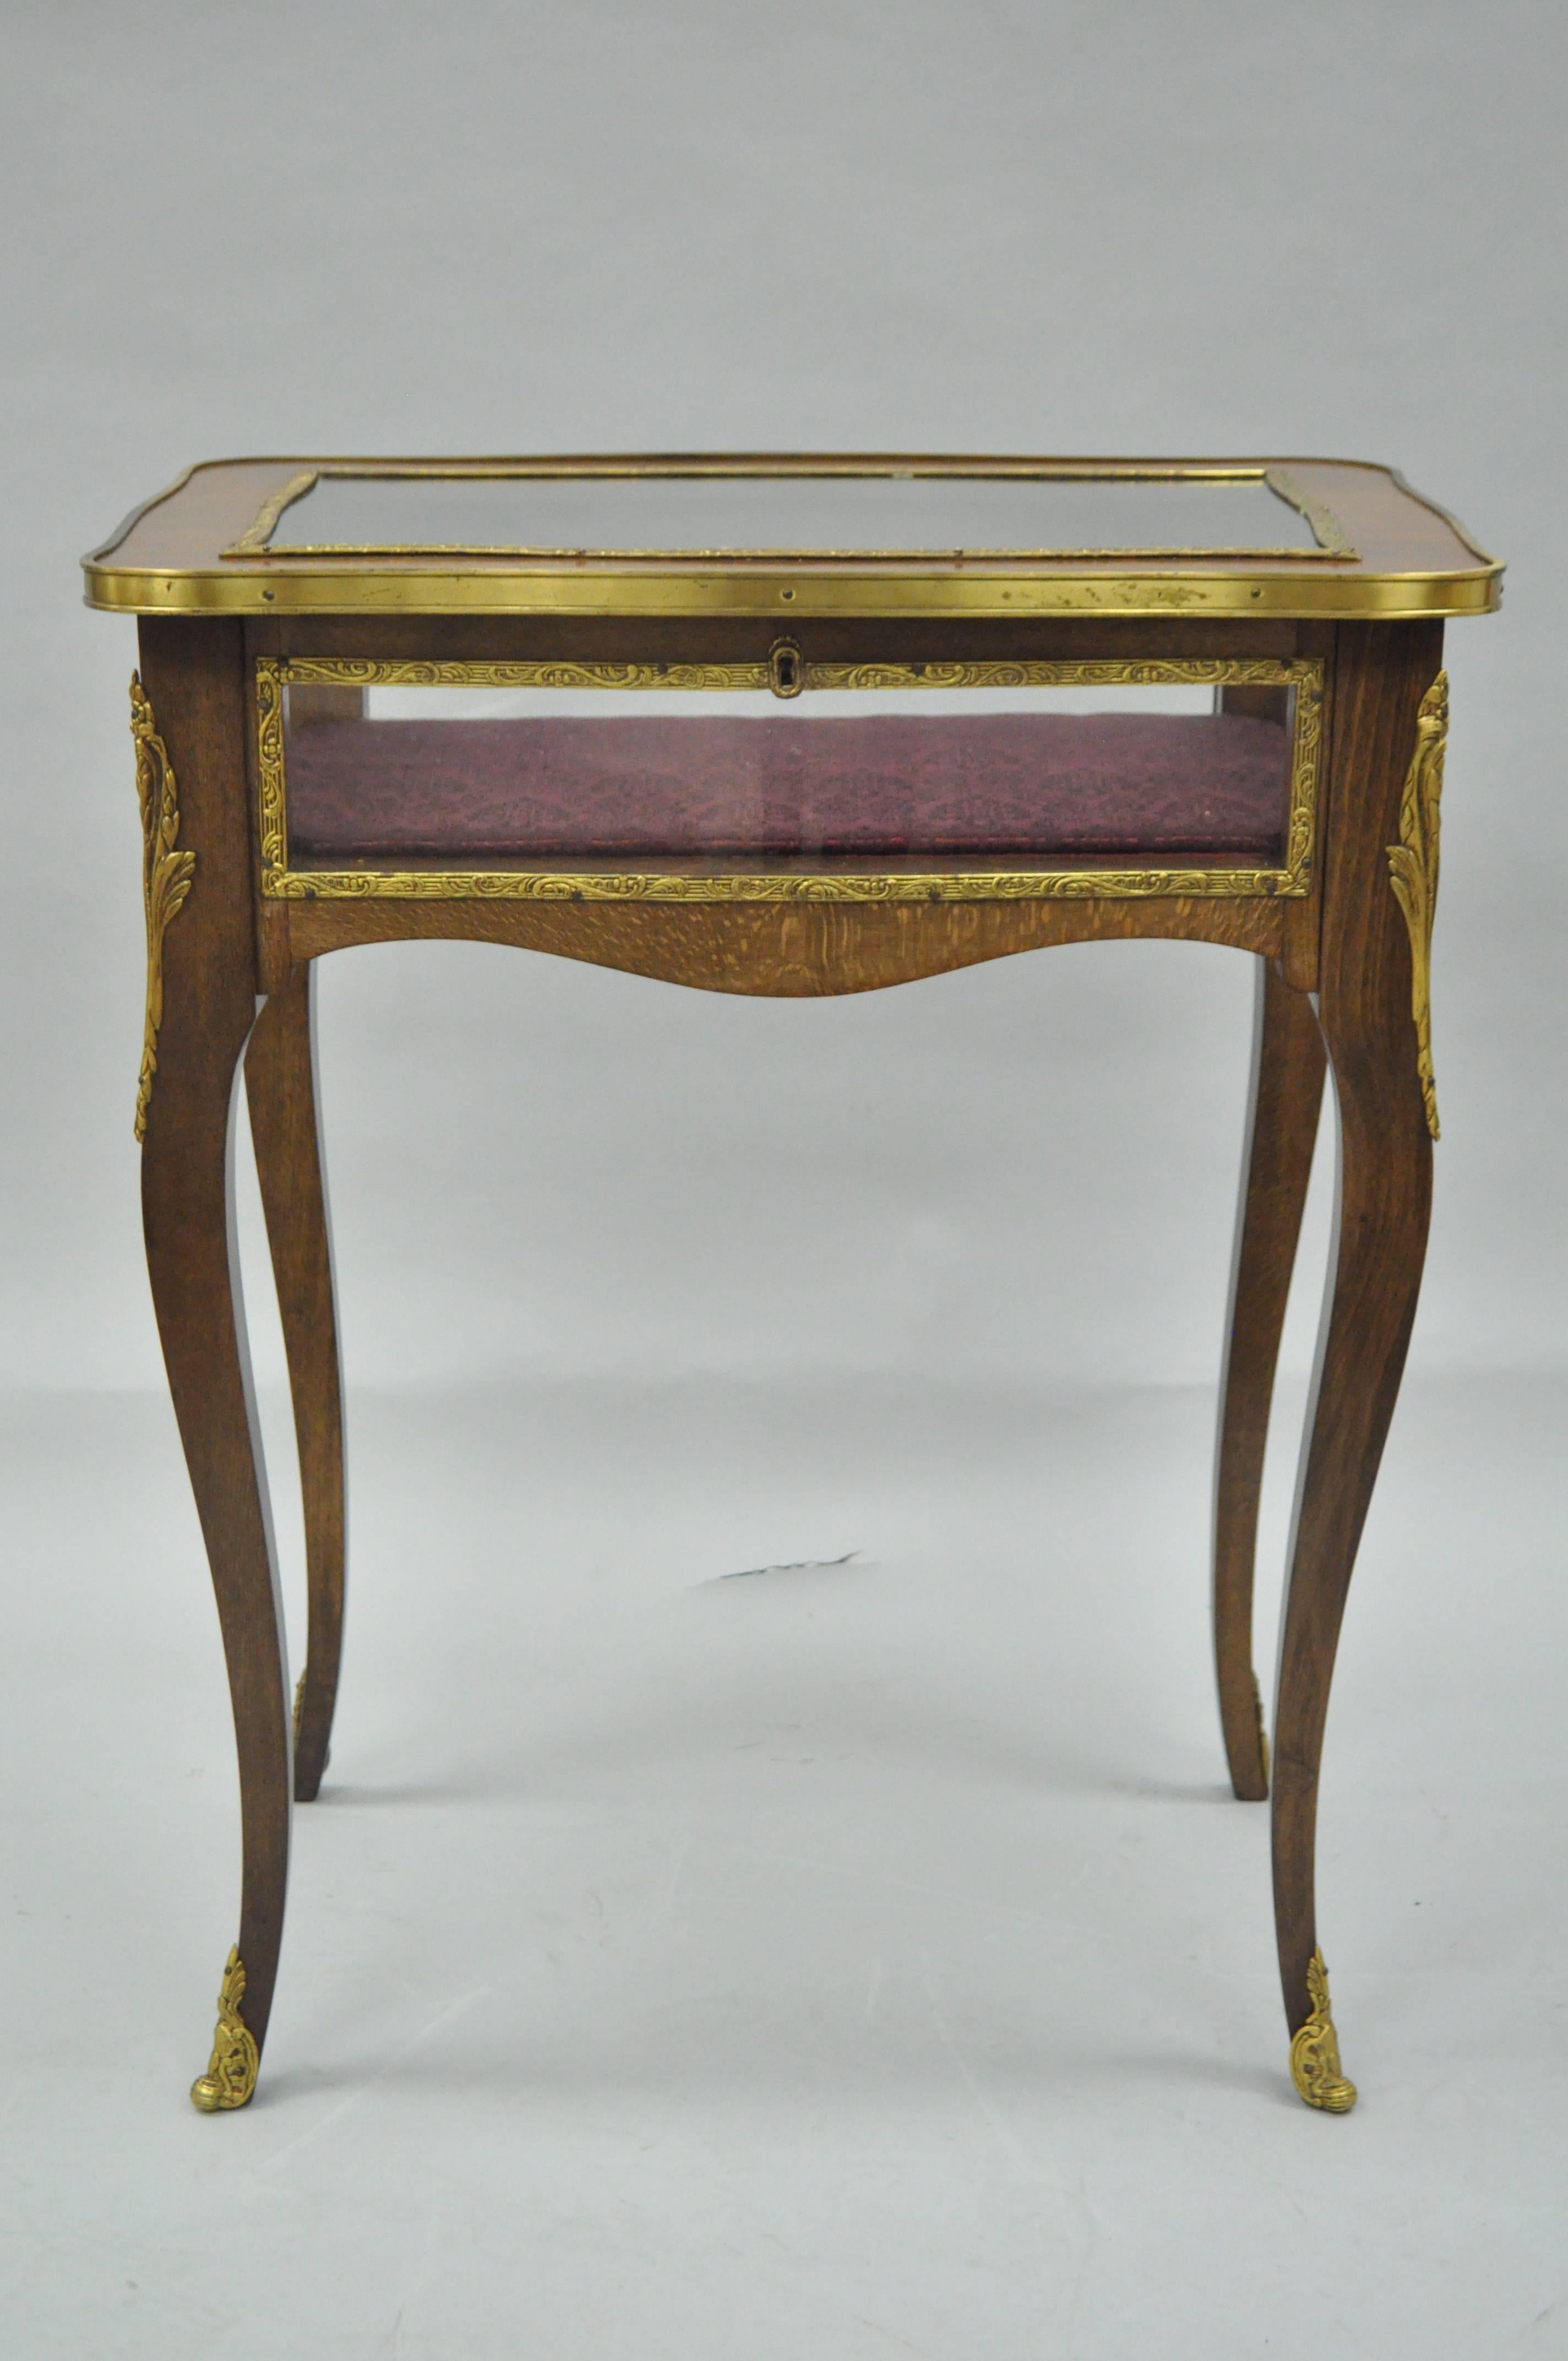 Attractive vintage French Louis XV style flip-top display accent table. Item features cast brass ormolu, glass flip-top, glass sides, shapely cabriole legs, and upholstered interior. Marked 